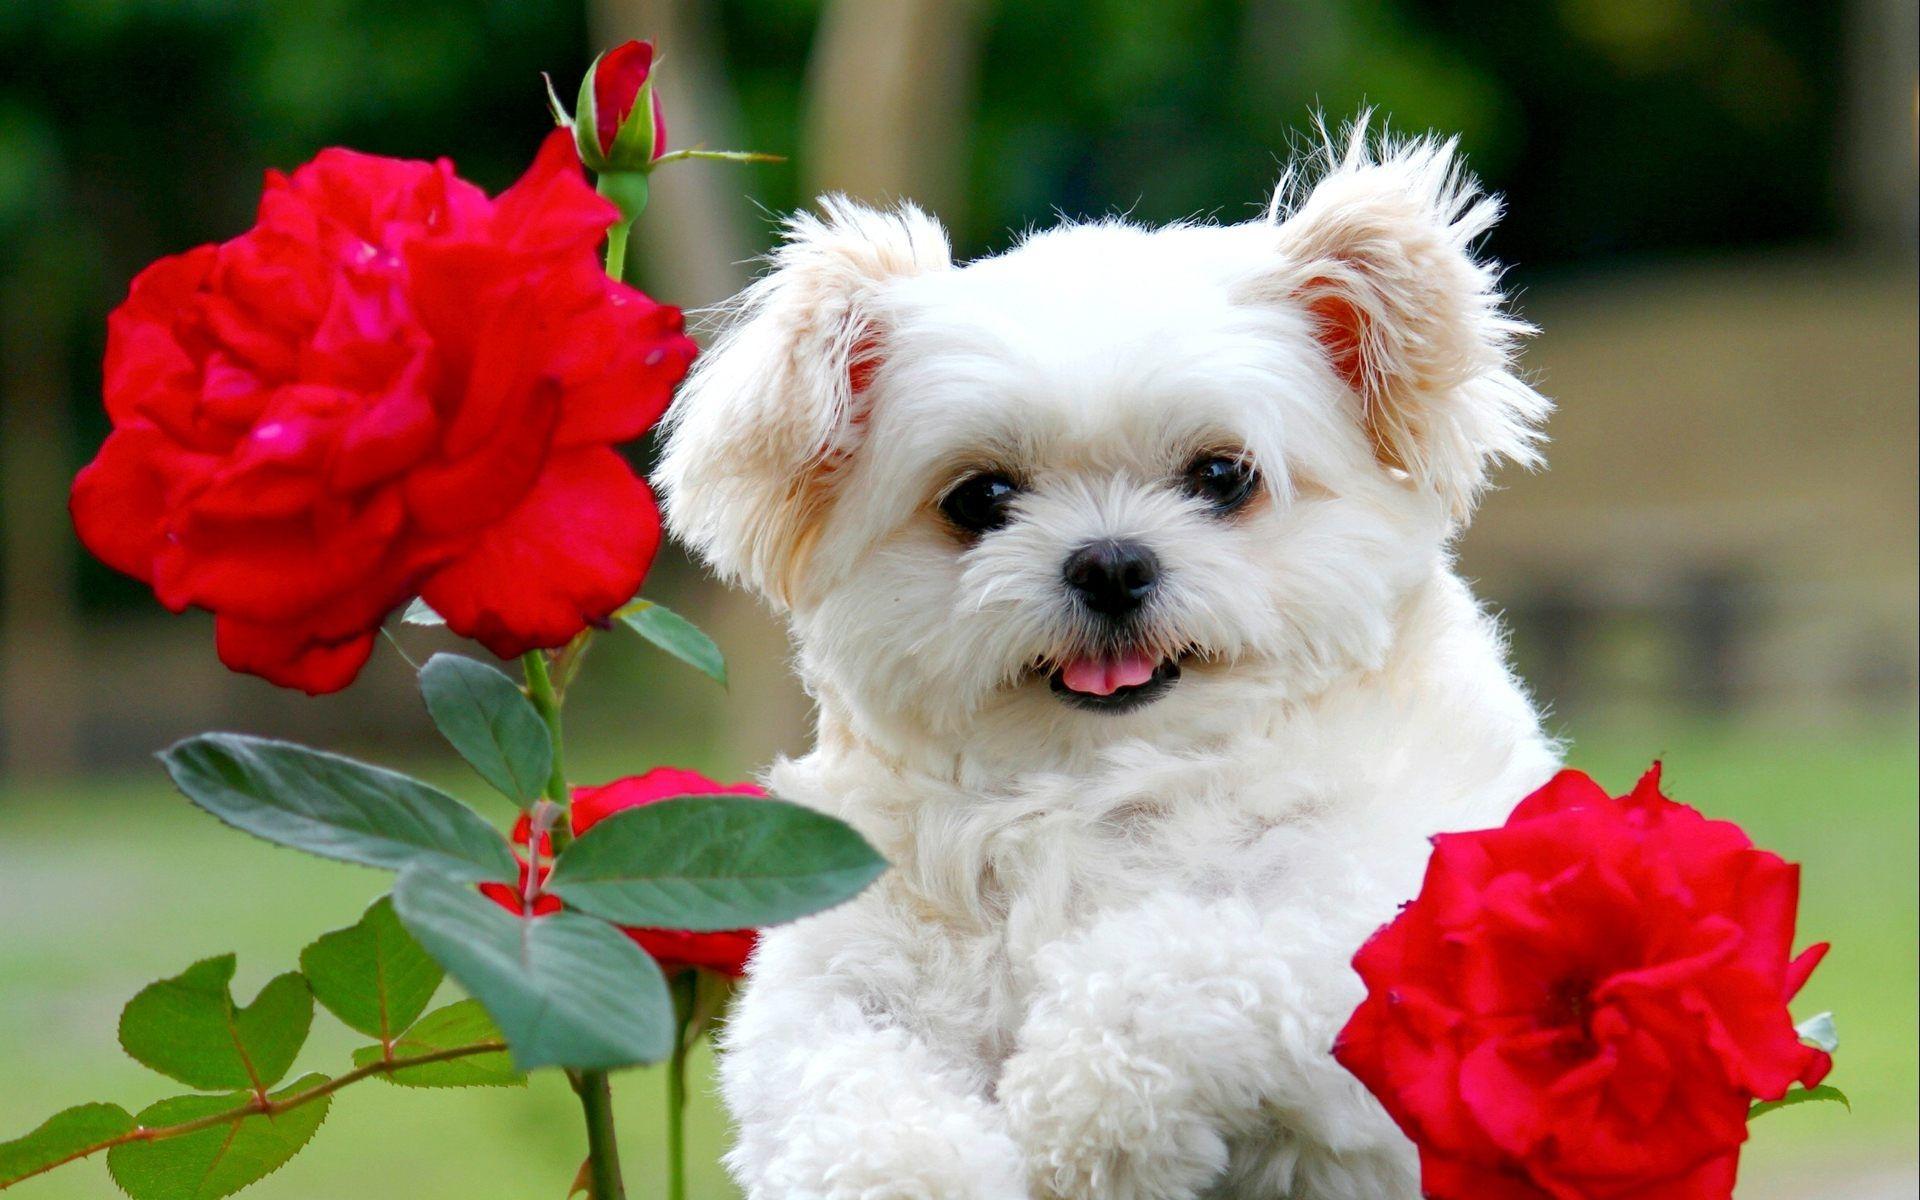 Cute white puppy with red rose flowers. HD Wallpaper Rocks. Cute puppy wallpaper, Cute white puppies, Cute fluffy puppies